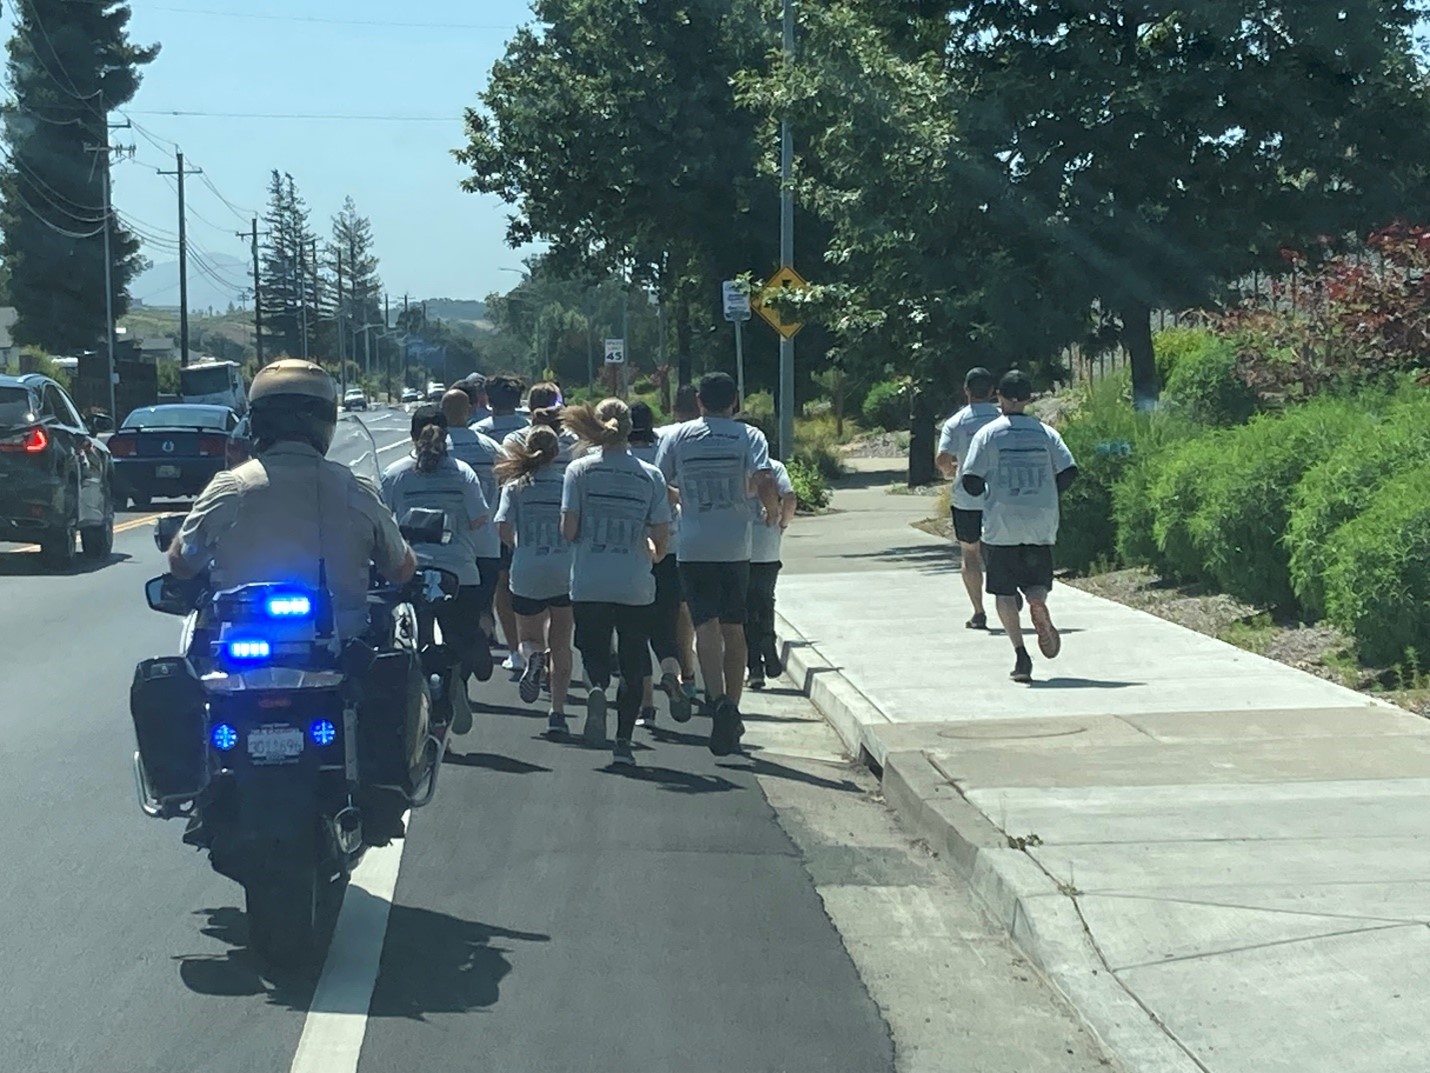 Probation team running in Special Olympics race event